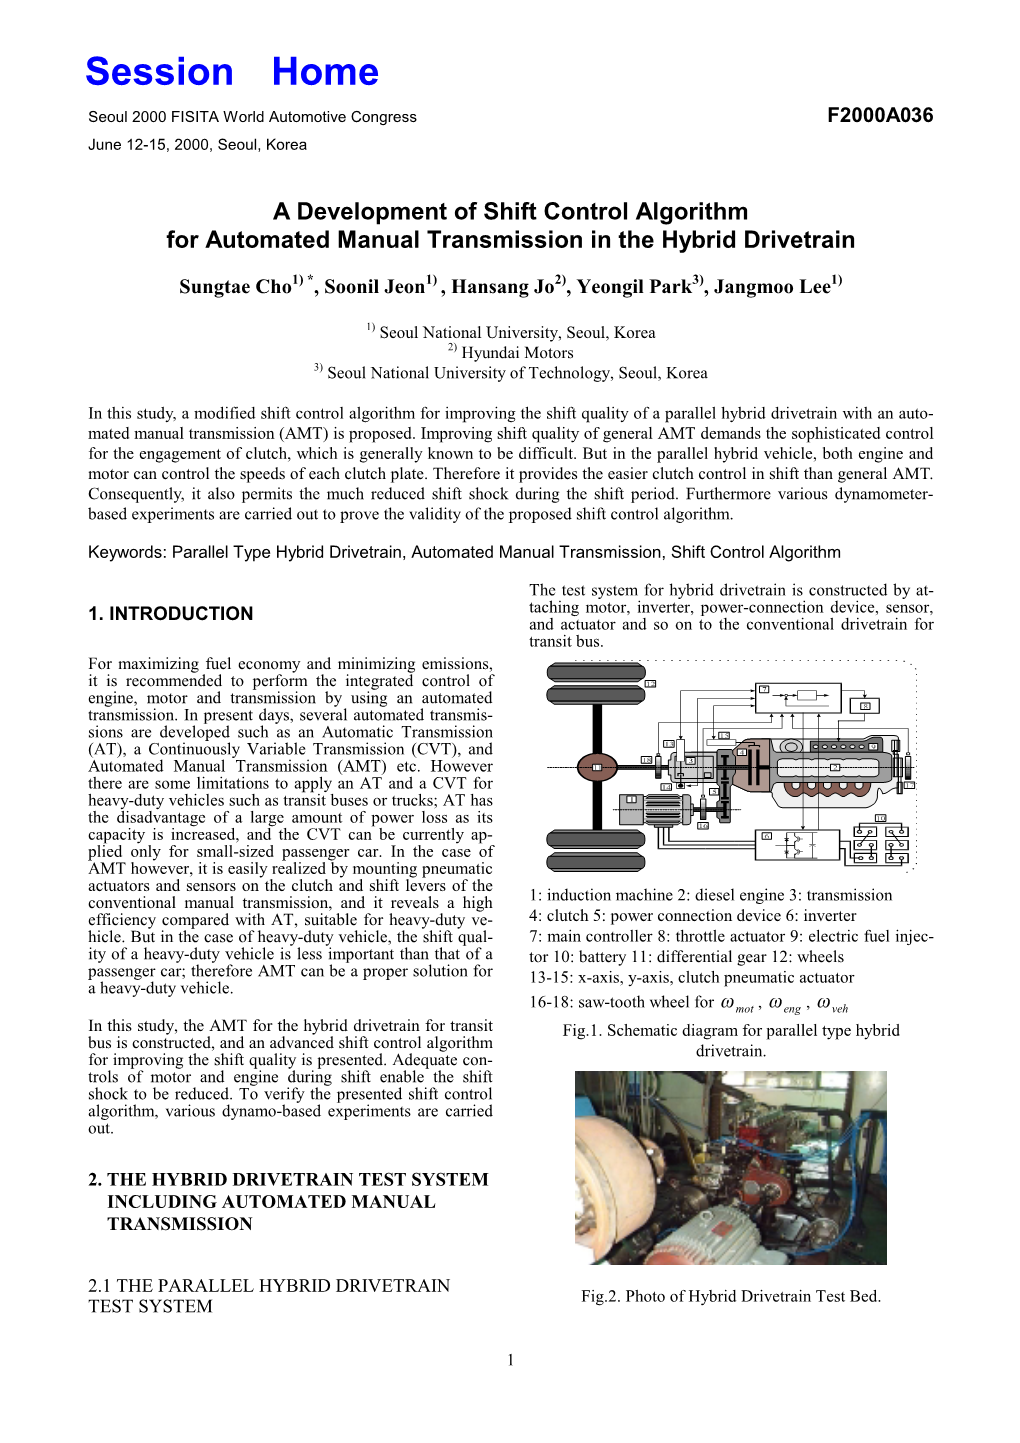 A Development of Shift Control Algorithm for Automated Manual Transmission in the Hybrid Drivetrain